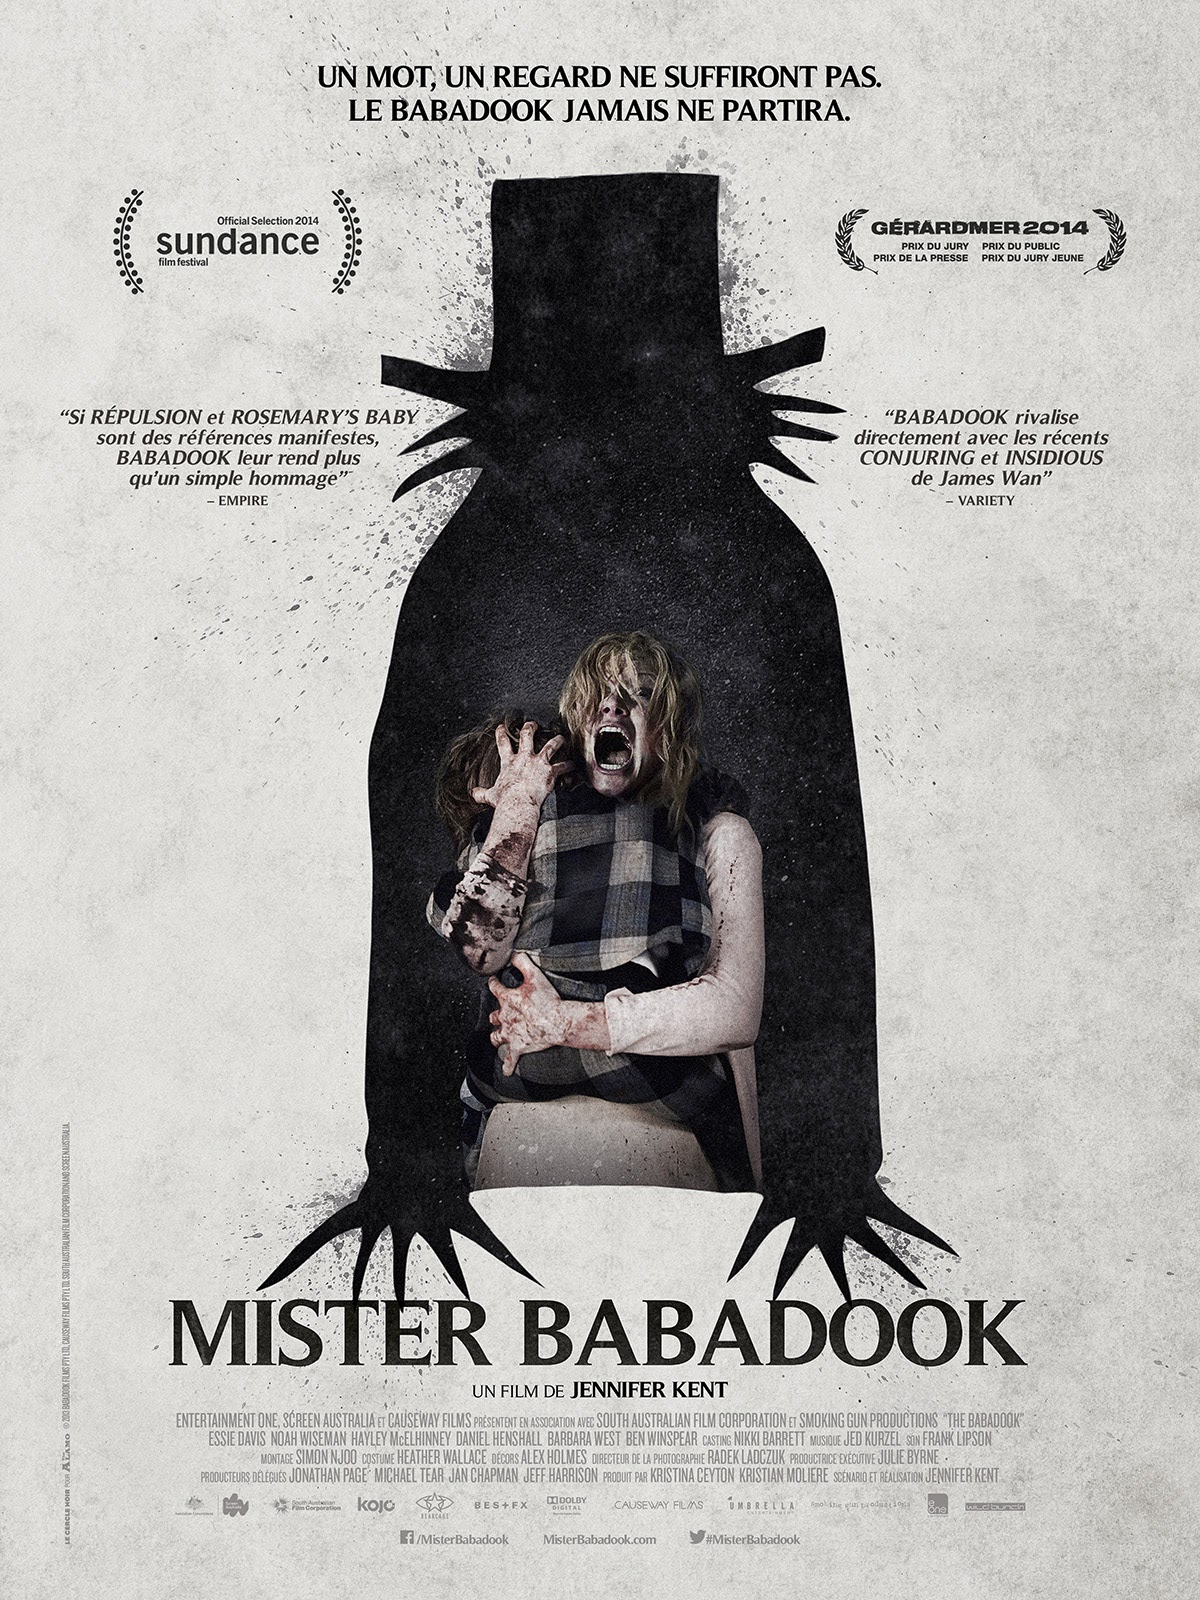 http://fuckingcinephiles.blogspot.fr/2014/07/critique-mister-babadook.html